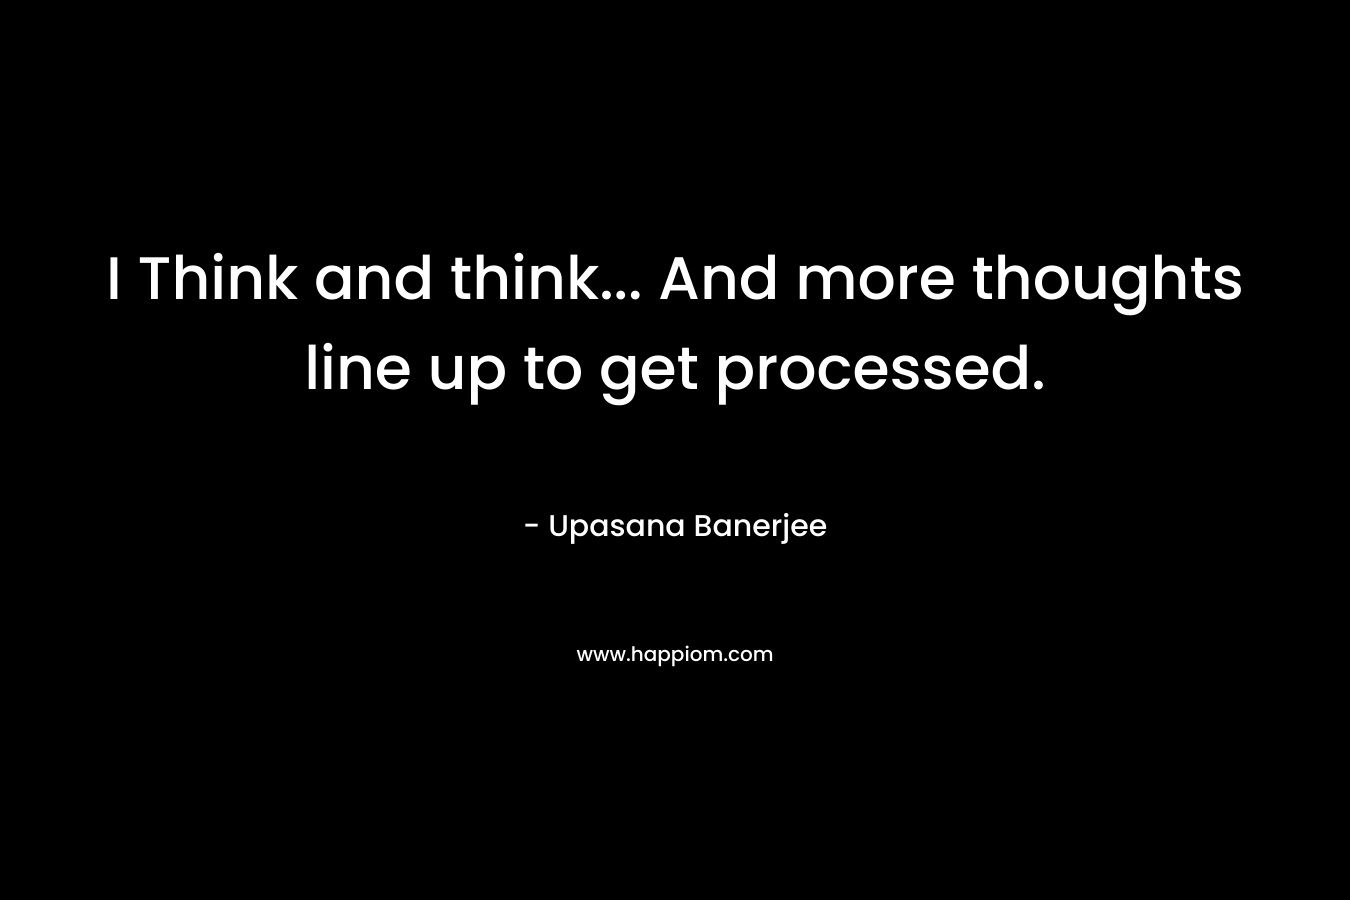 I Think and think… And more thoughts line up to get processed. – Upasana Banerjee